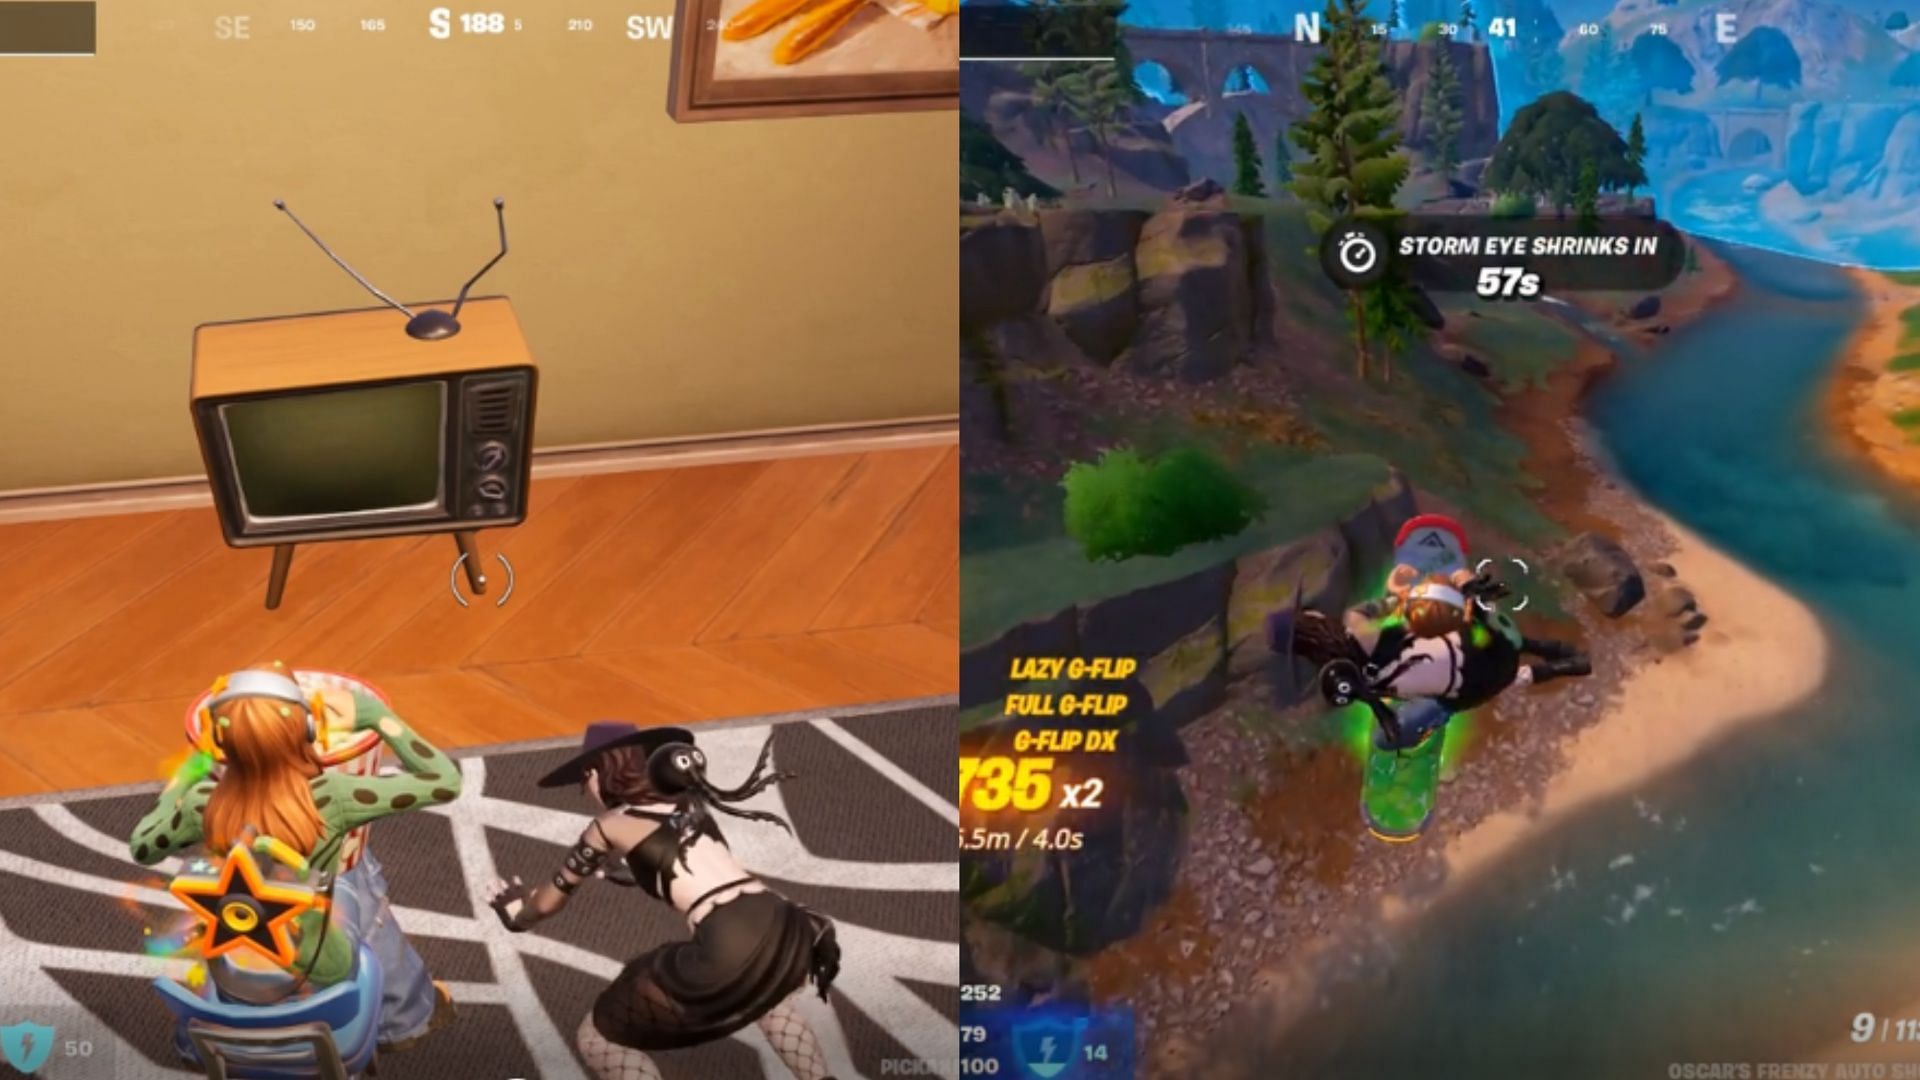 Fortnite player knocks down opponent and forces them to watch TV, community left in splits